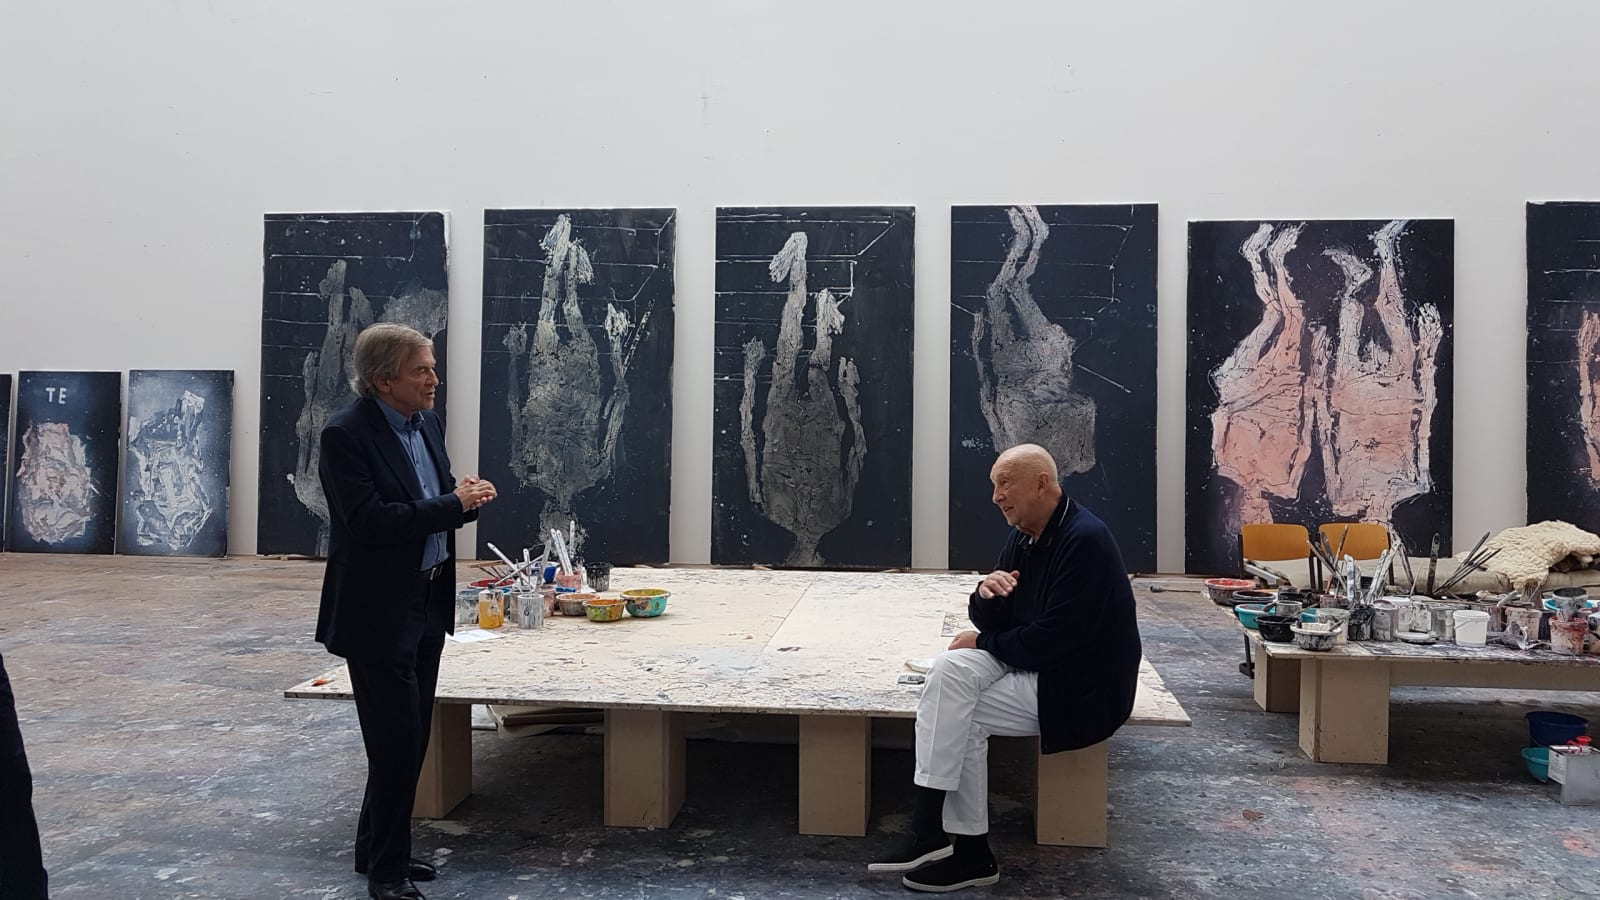 <h6 style="text-align: center;">Alan Cristea and Georg Baselitz in Baselitz's studio in South Germany, 2018.</h6><p style="text-align: center;">Photo: Leeor Engländer</p>